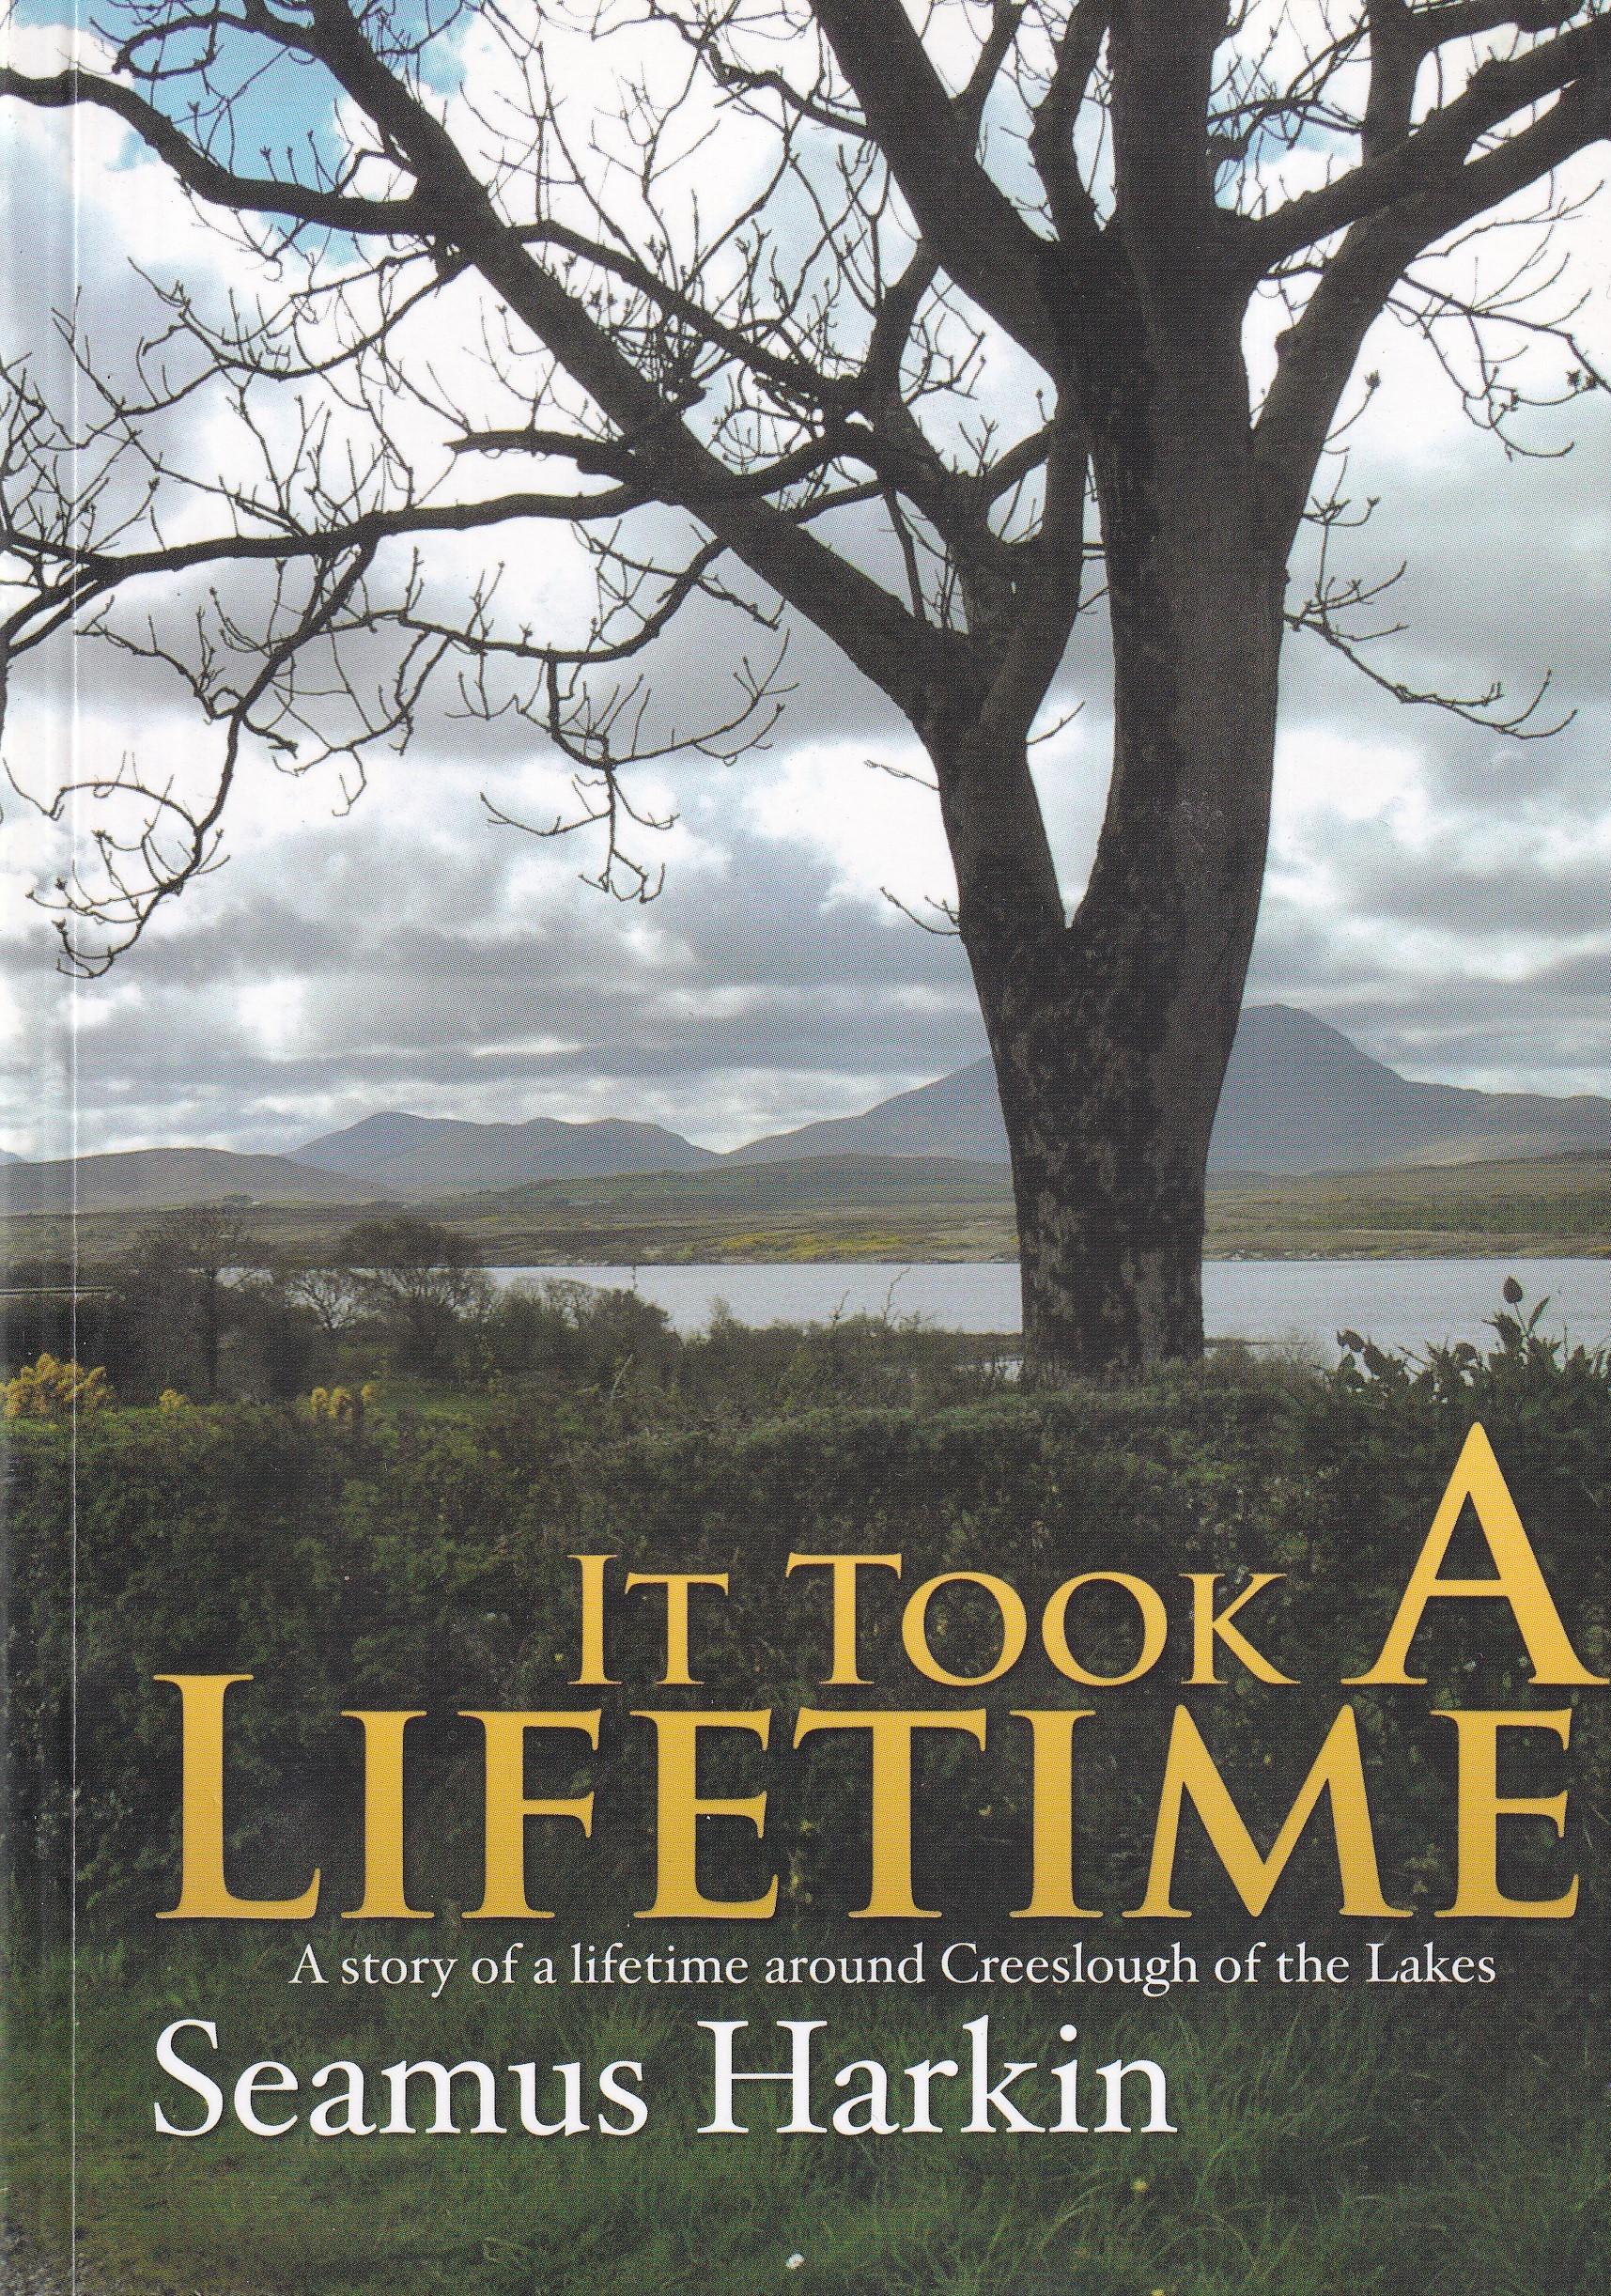 It Took a Lifetime: A Story of a Lifetime Around Creeslough of the Lakes by Seamus Harkin